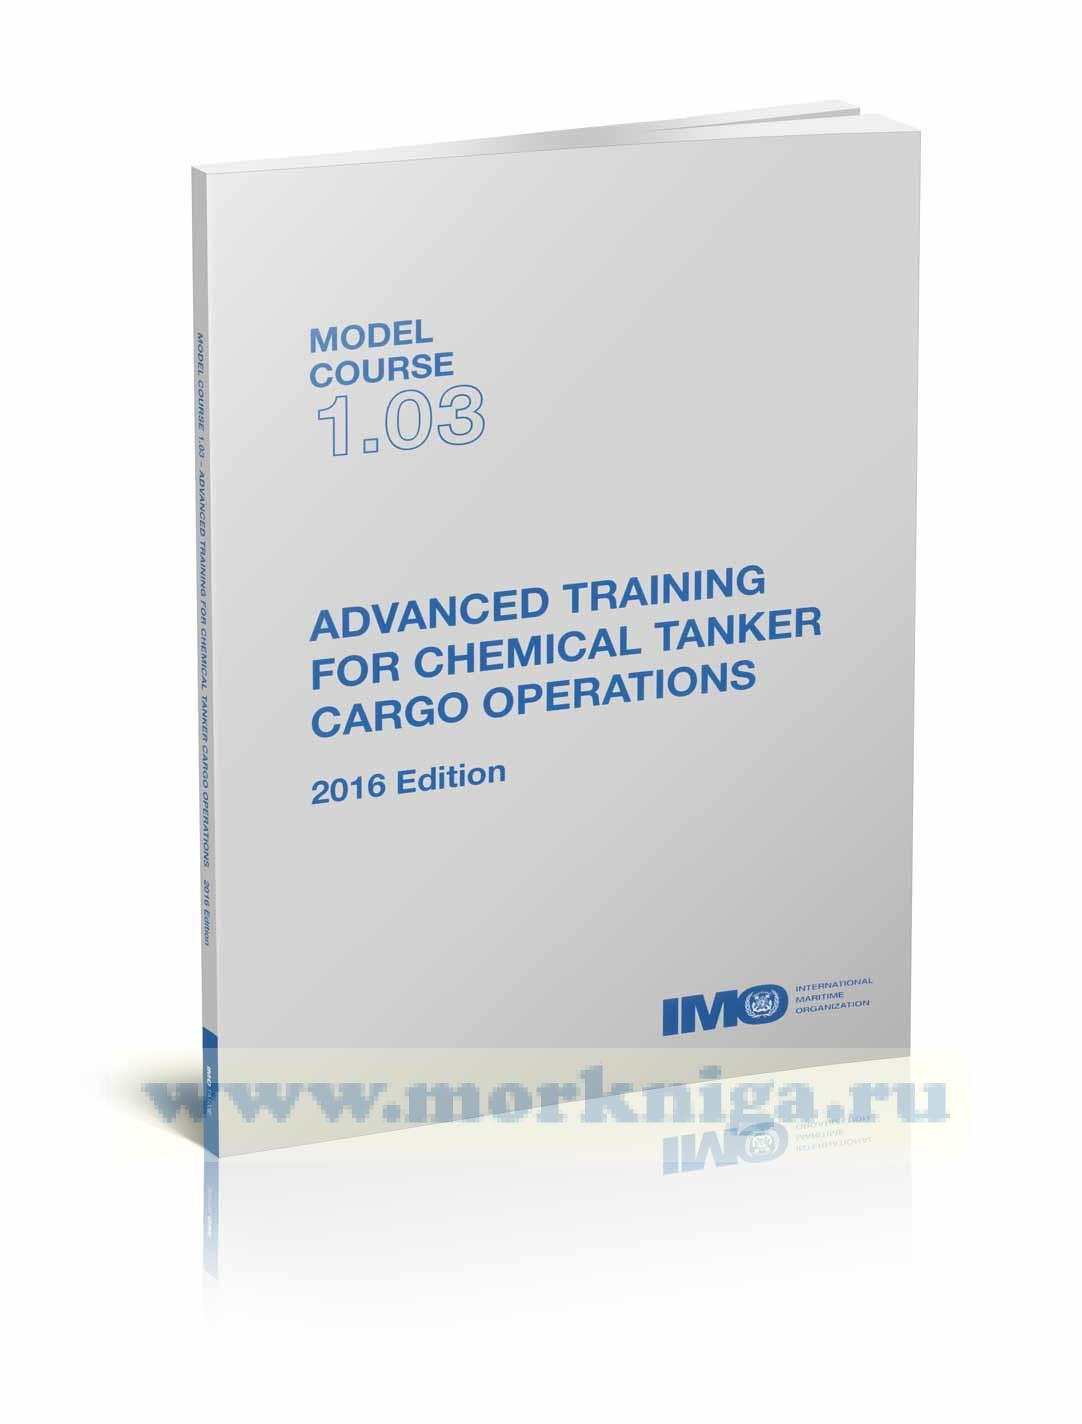 Advanced training for chemical tanker cargo operations. Model course 1.03. 2016 Edition